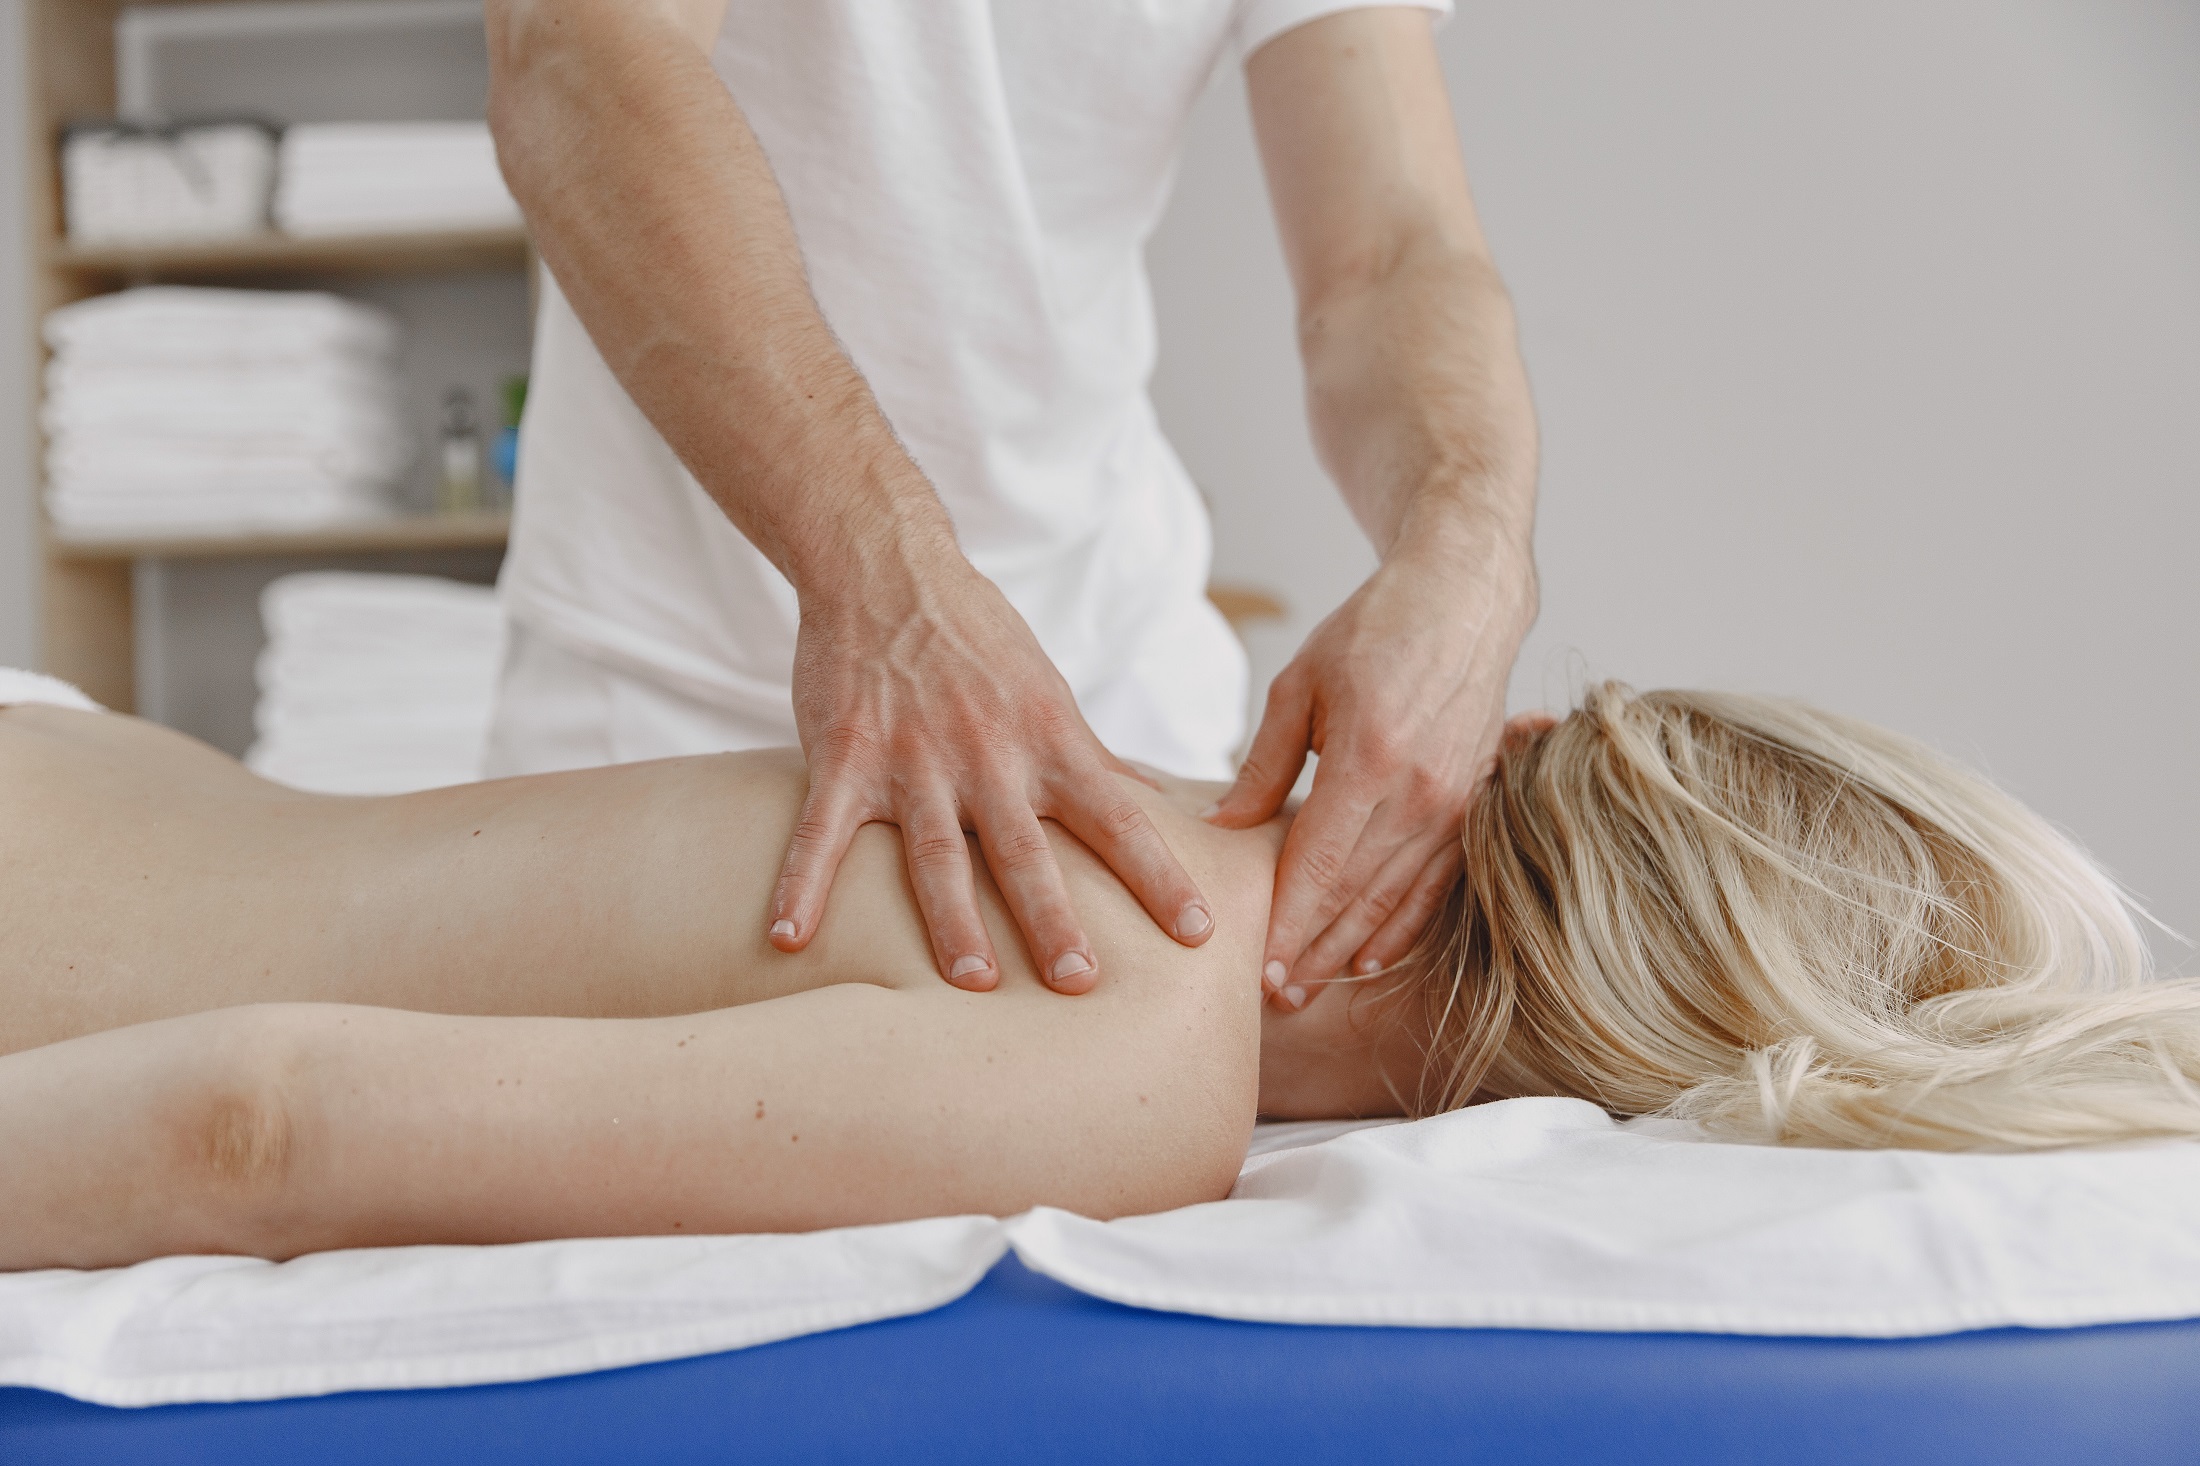 Do you know what <strong>a classic massage</strong> is?